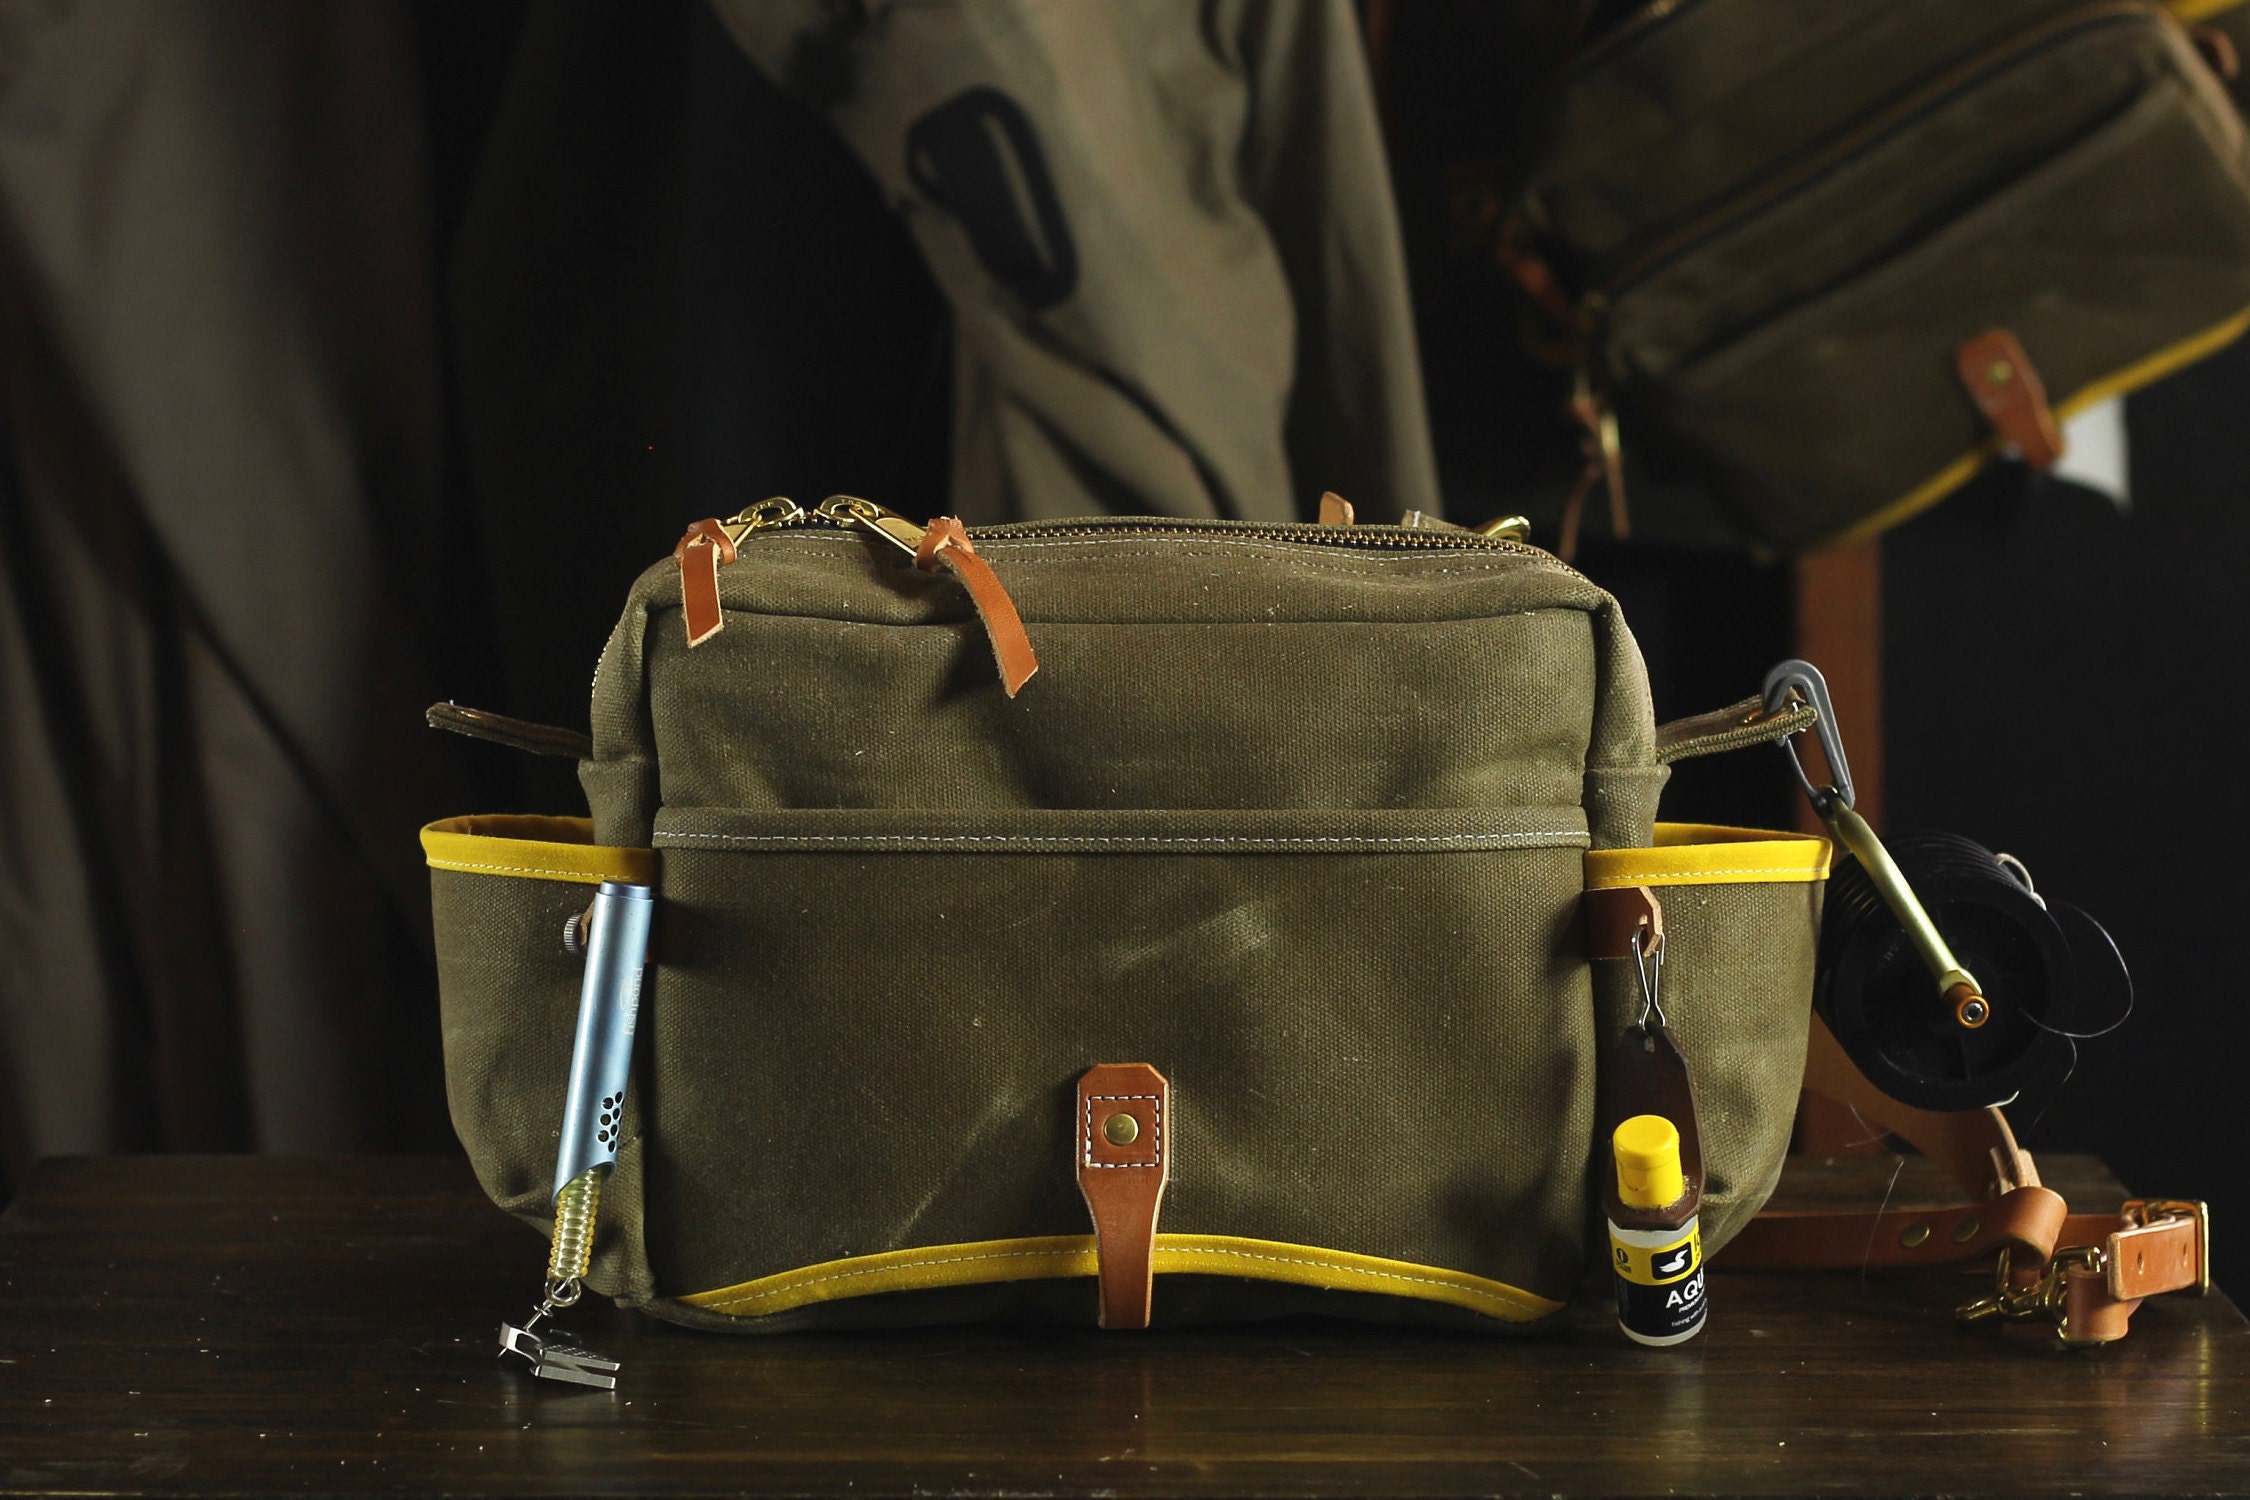 Minimalist Waxed Canvas and Leather Fly Fishing Bag With Front Mounted Net  Slot and Creel Style Strap Brown 